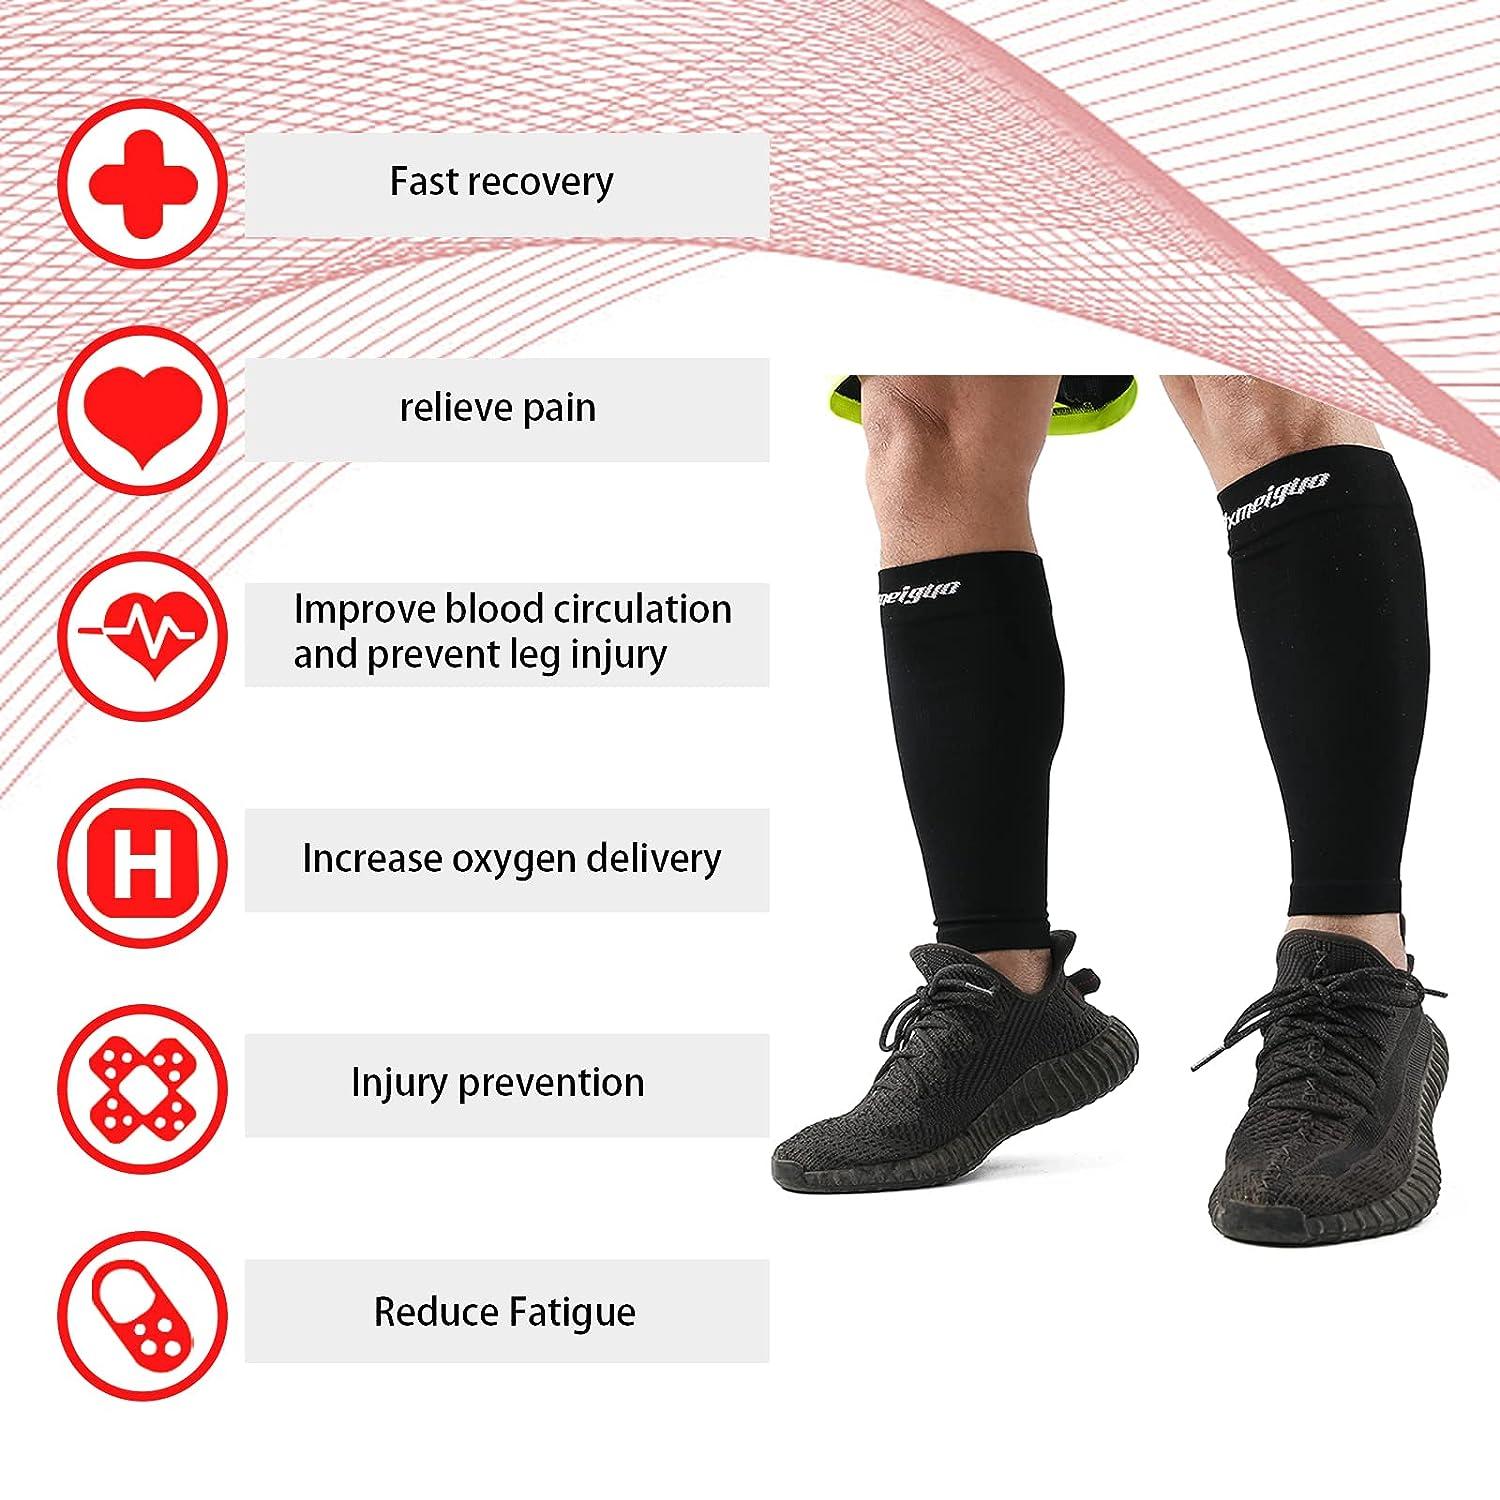 Buy Calf Compression Sleeve. Copper Fit Recovery Leg Compression for Men  & Women. Calf Guard for Shin Splint & Calf Pain . For Running,  Cycling, Air Travel, Circulation, Maternity, Nurses - Large